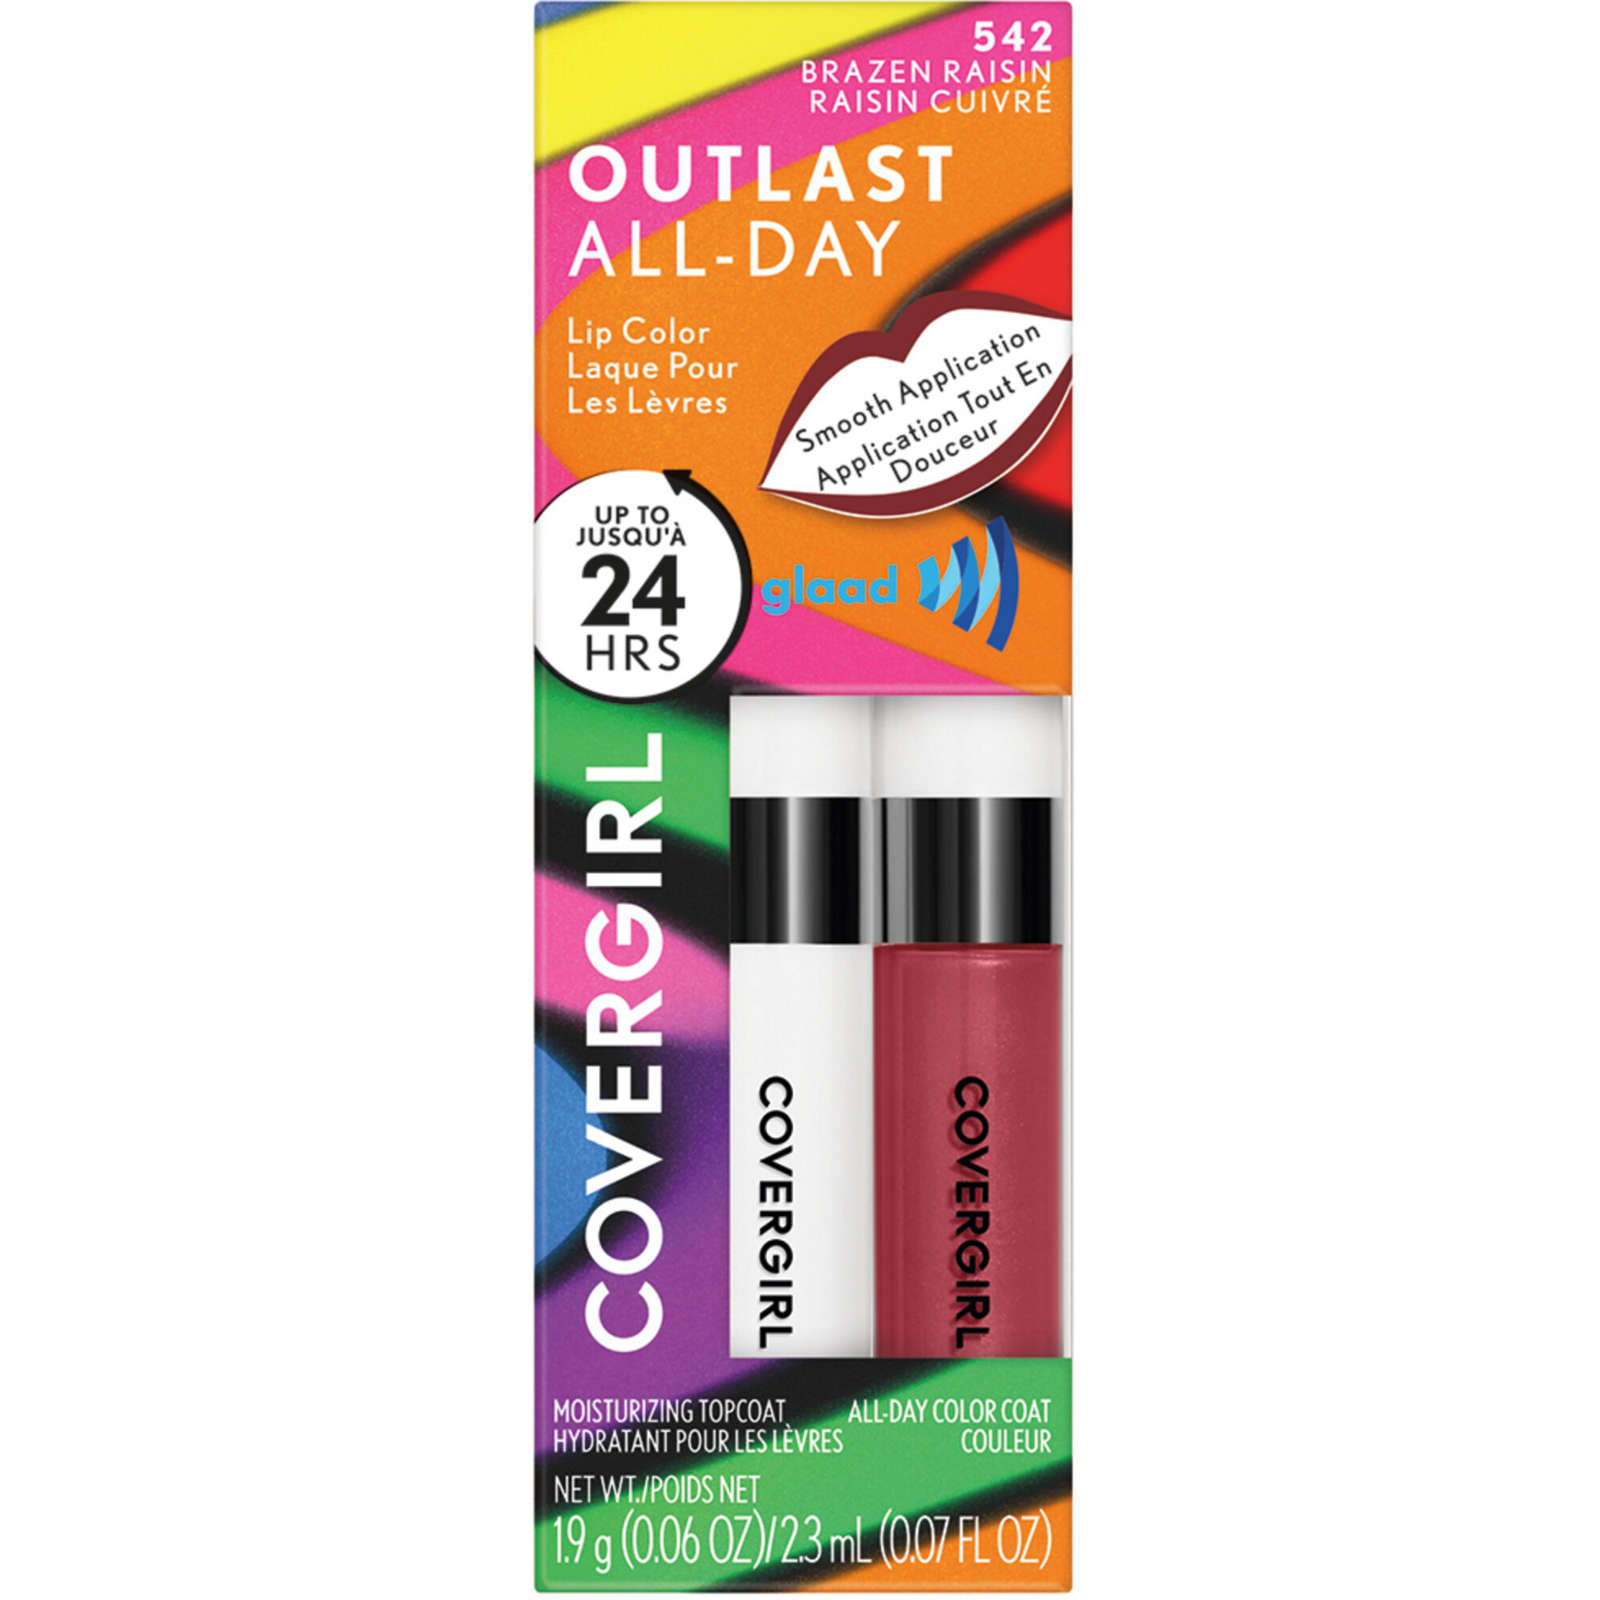 Outlast All-Day Lip Color, long-lasting coverage, easy two-step system, moisturizing formula, transfer-resistant, 100% Cruelty-Free